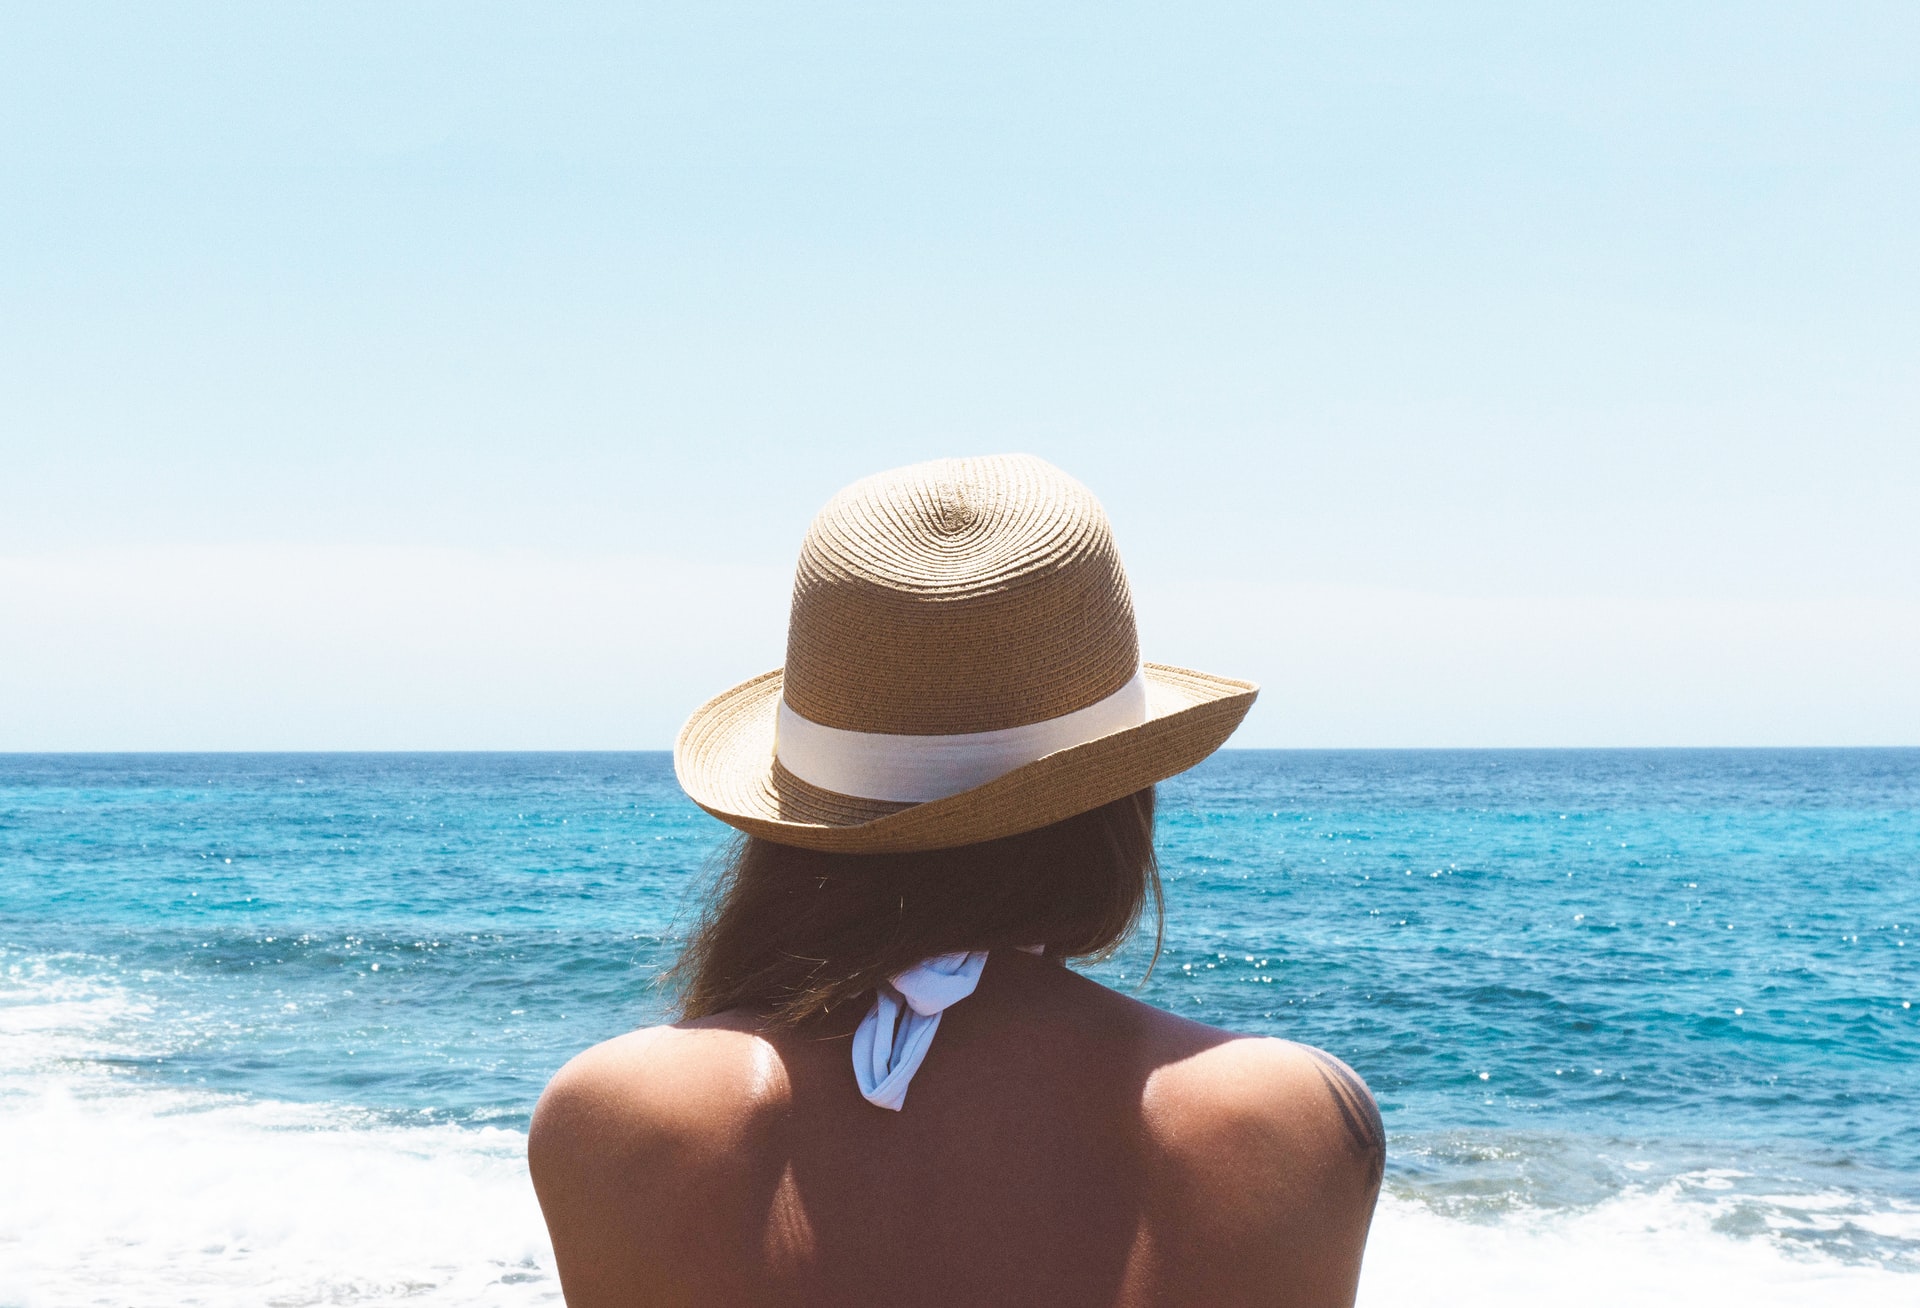 person sits on the beach facing the sea away from the camera, shoulders & back skin exposed, wearing a hat, summer skincare tips